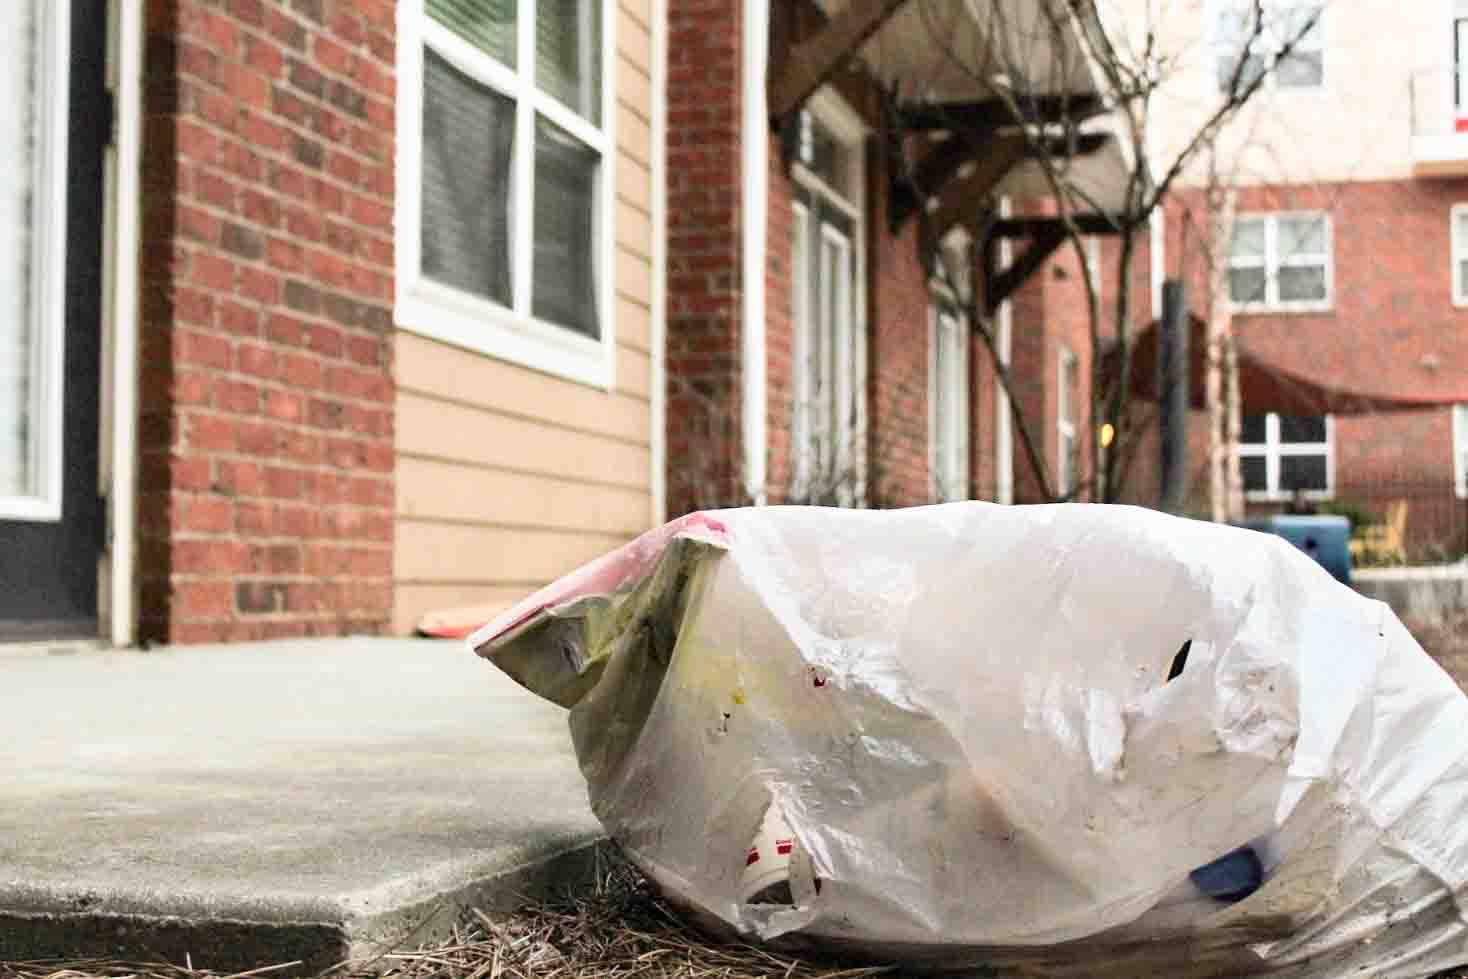 Blake residents express concerns about littering